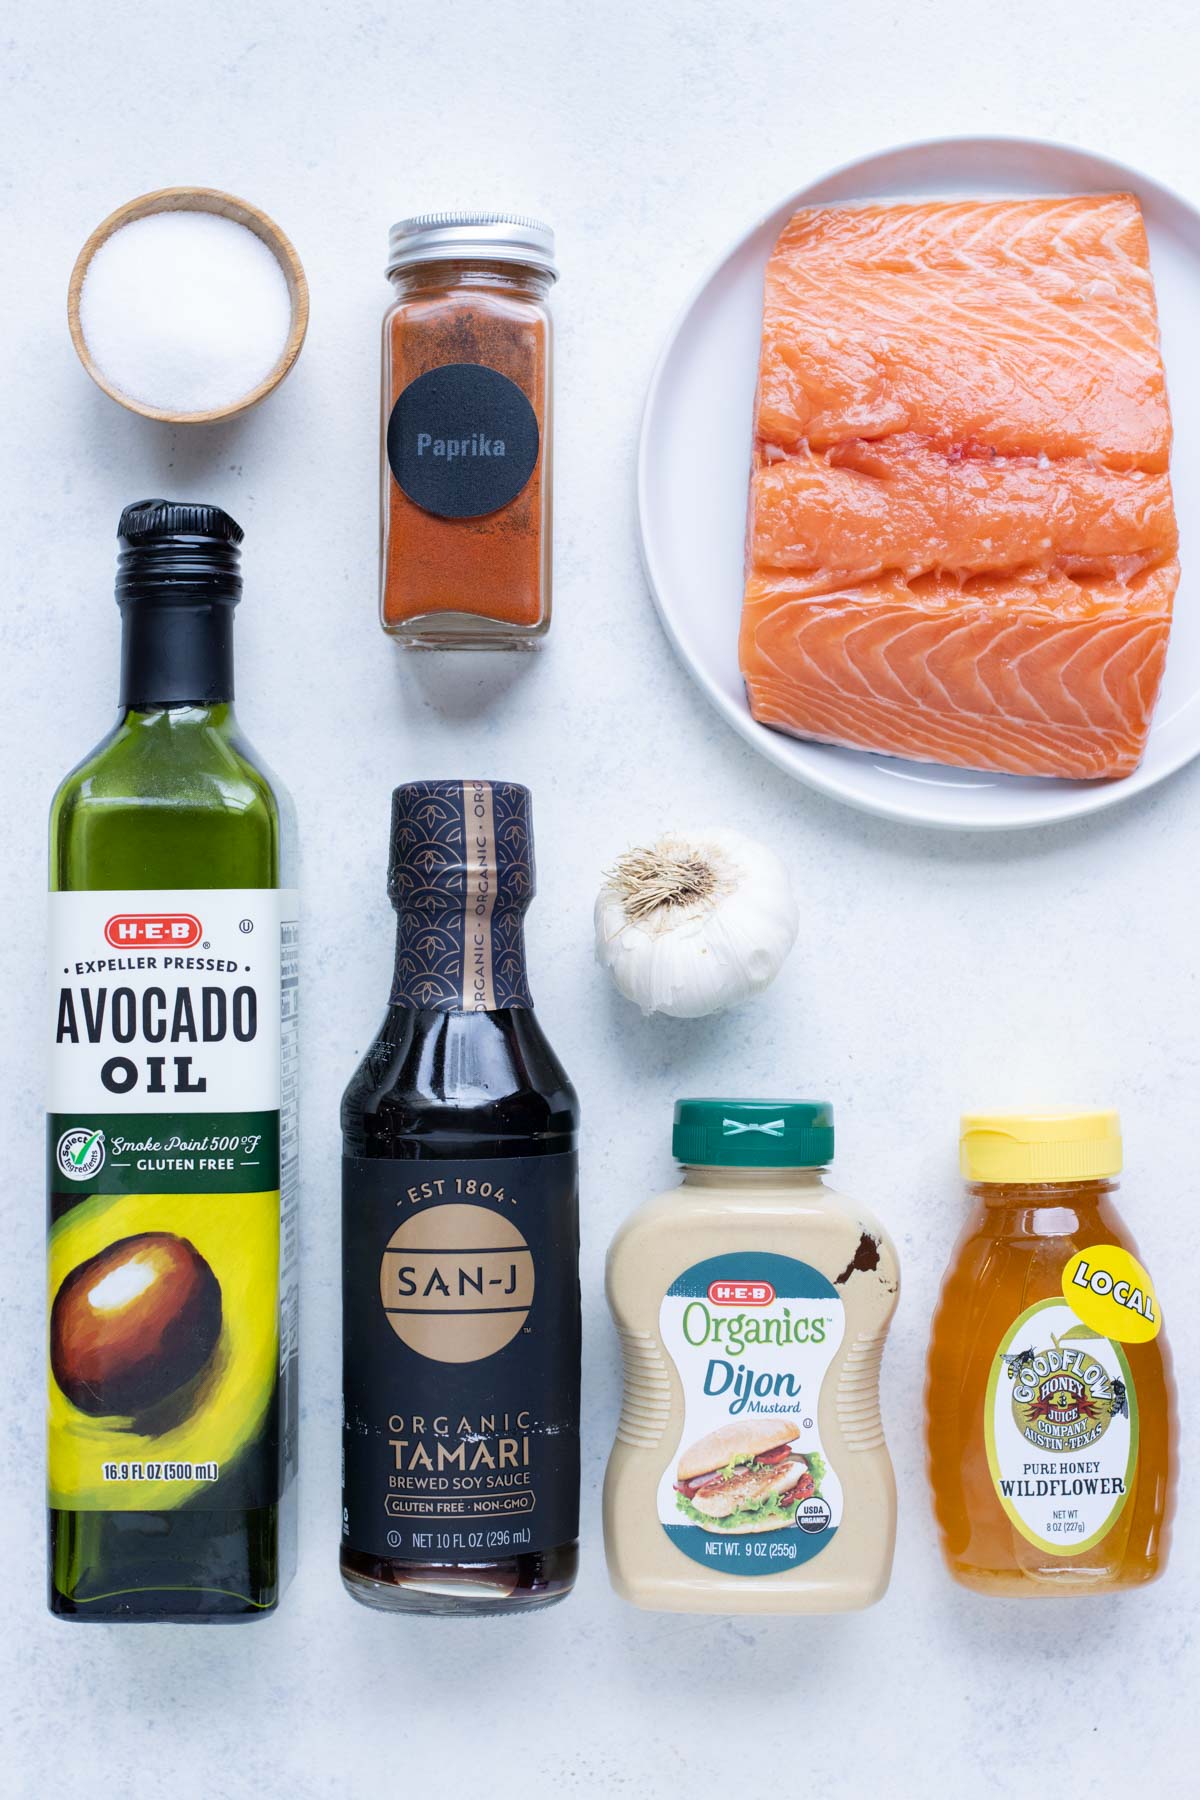 Salmon, honey, avocado oil, garlic, soy sauce, cayenne, and dijon mustard are the ingredients for this recipe.